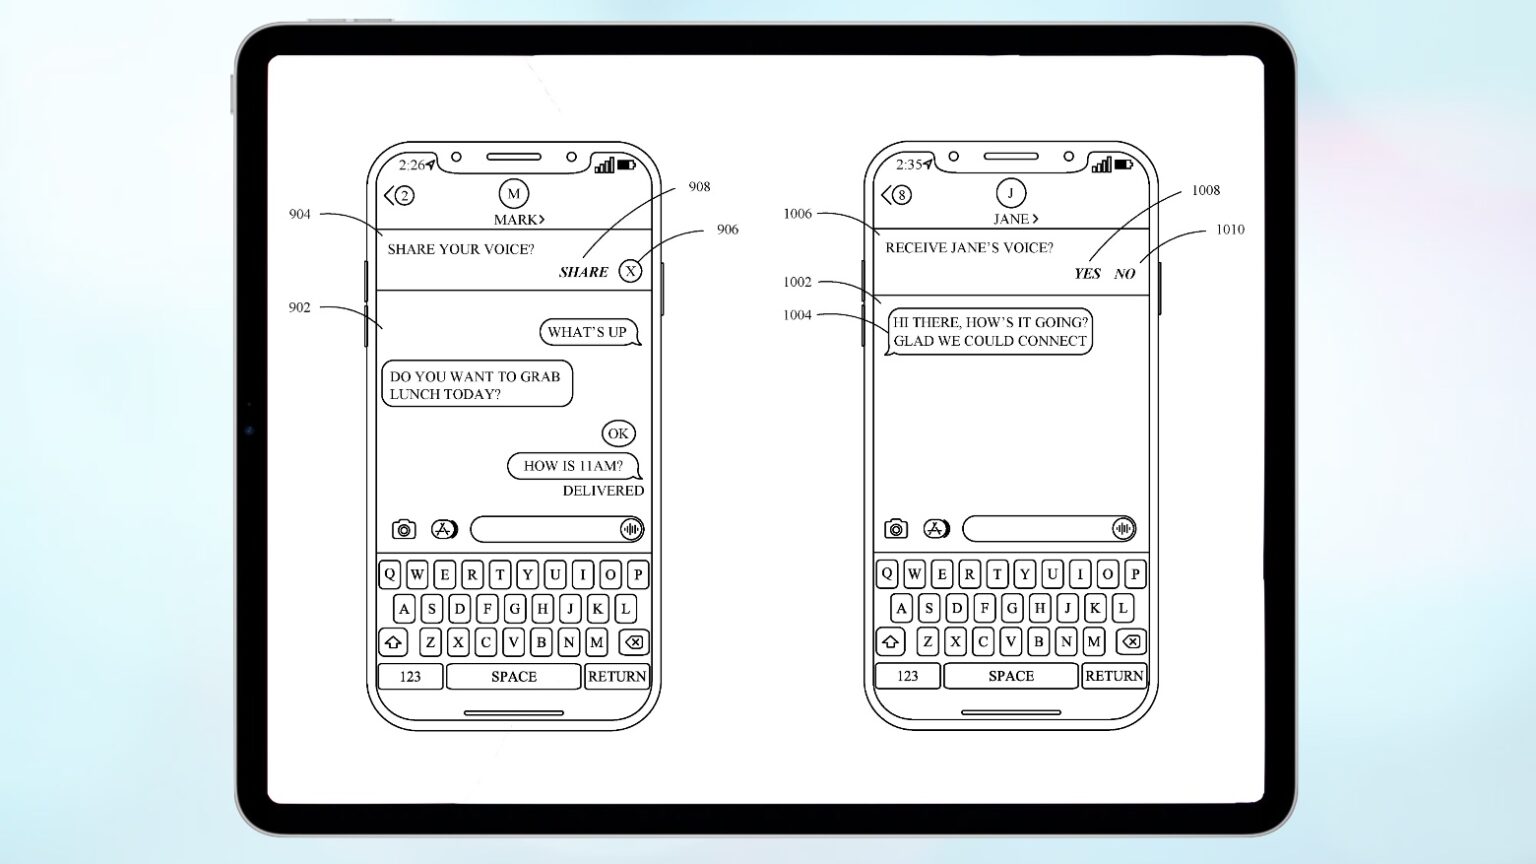 Apple wants iPhones to read text messages in the sender's voice